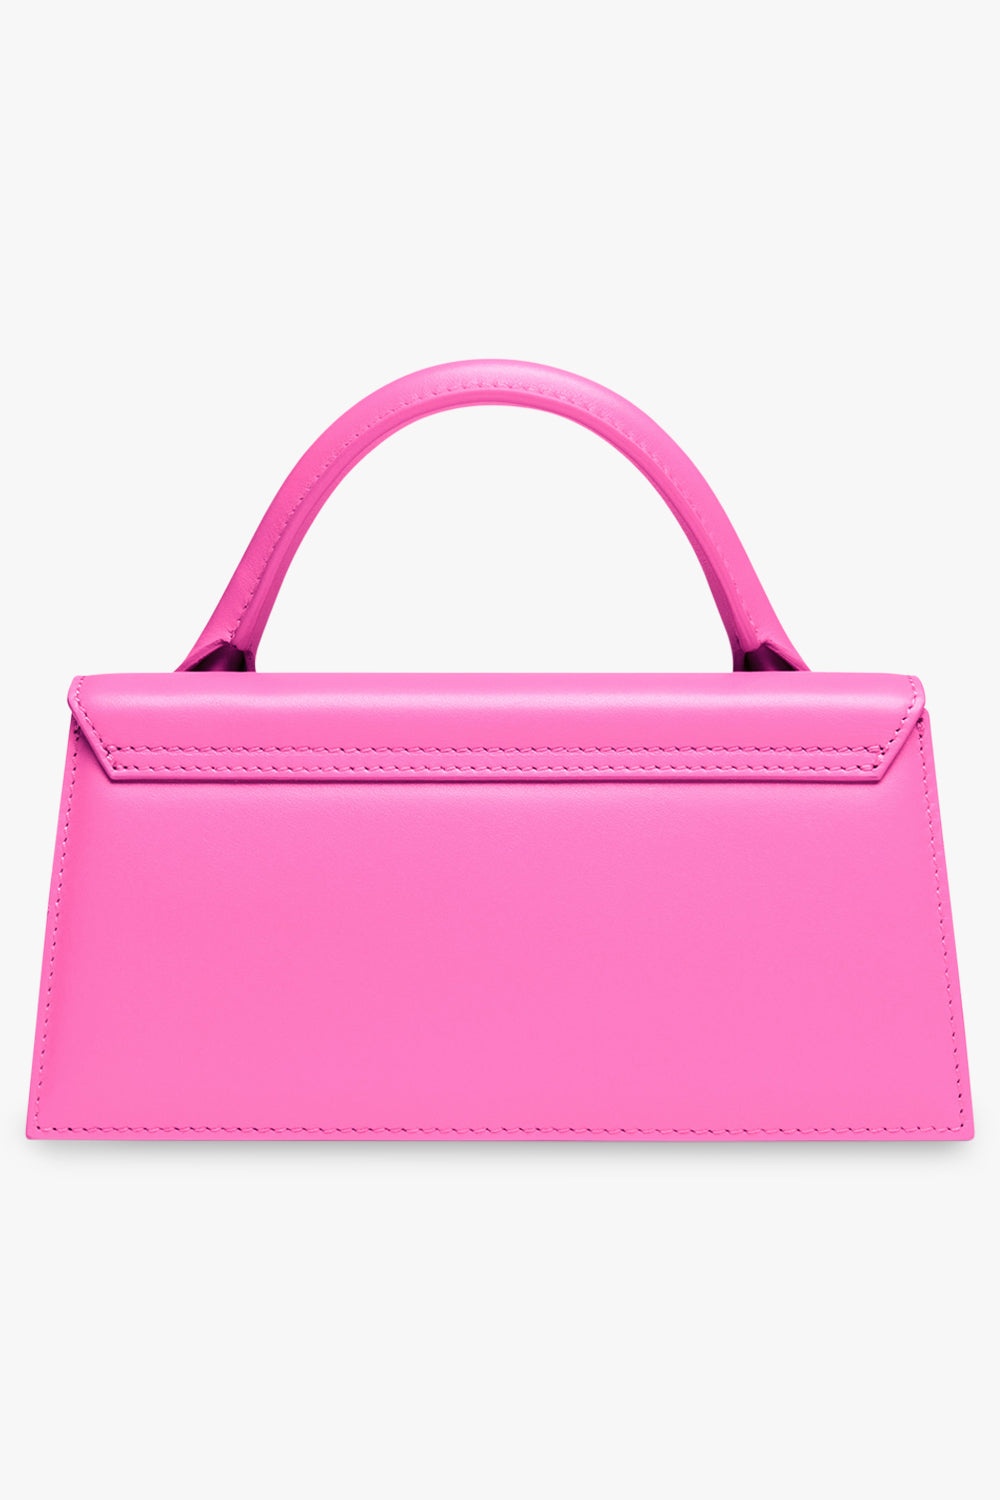 LE CHIQUITO LONG BAG | NEON PINK - 5